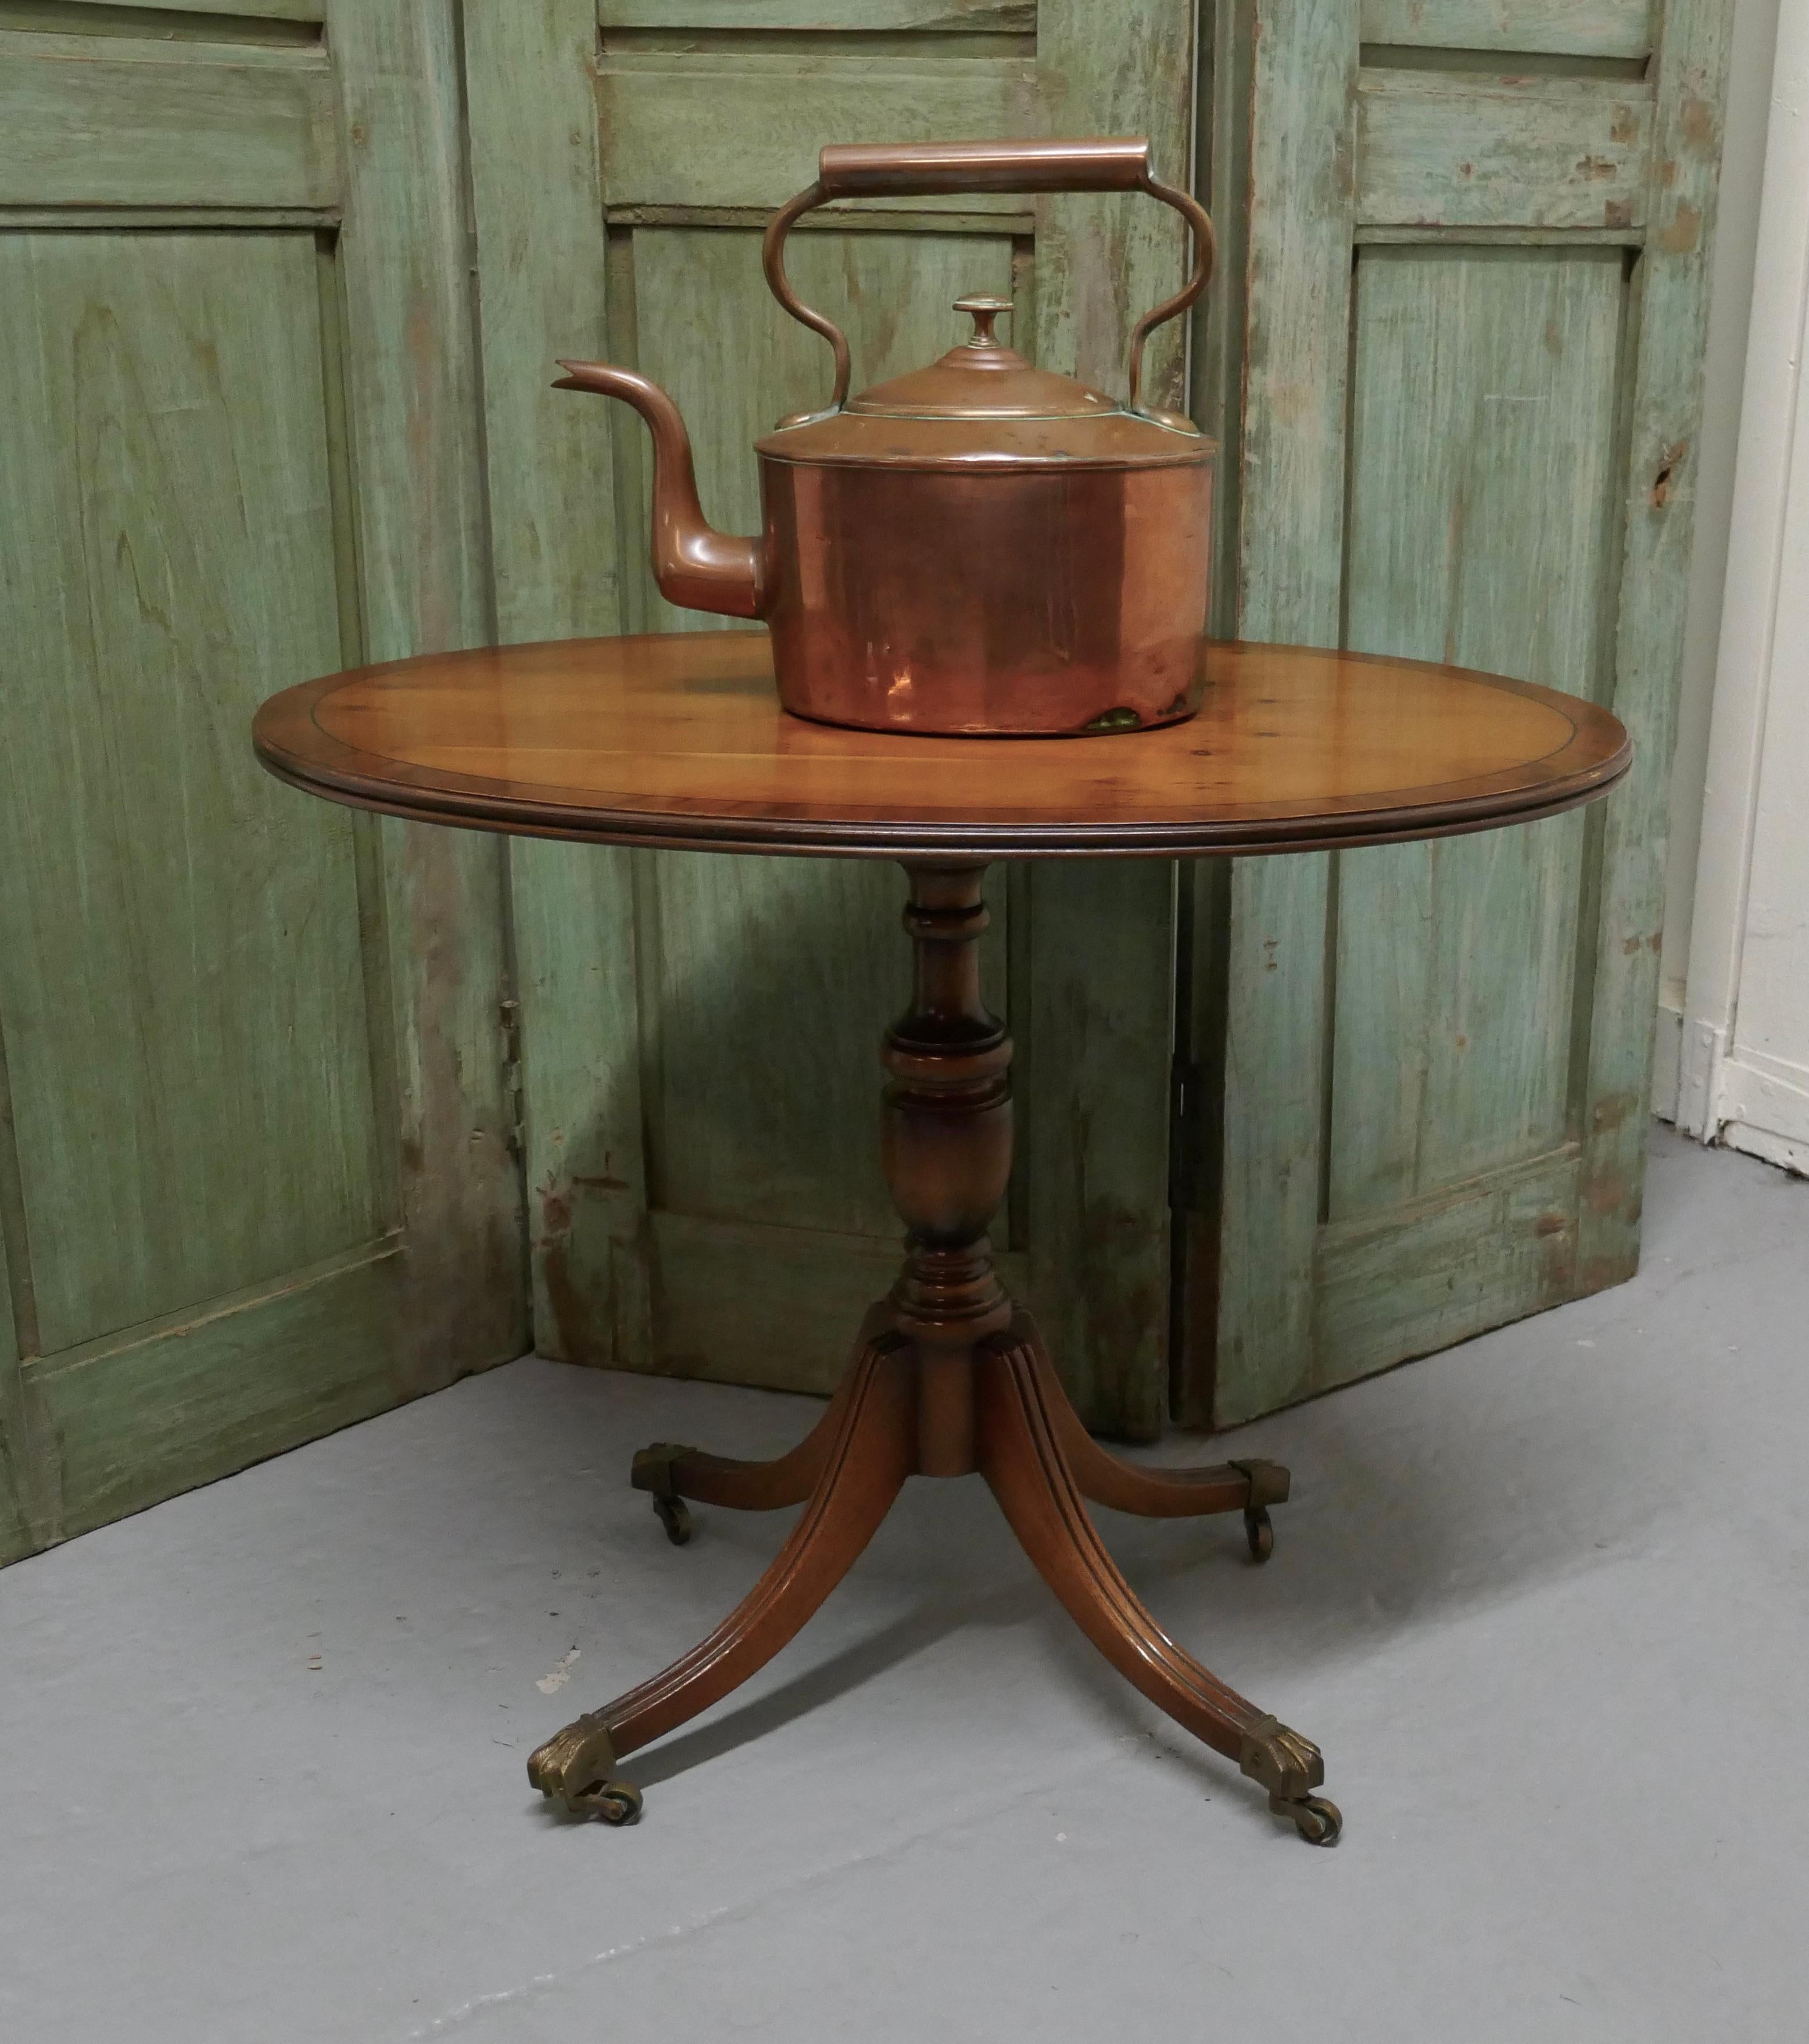 19th Century Charming 19th Oval Century Copper Kettle